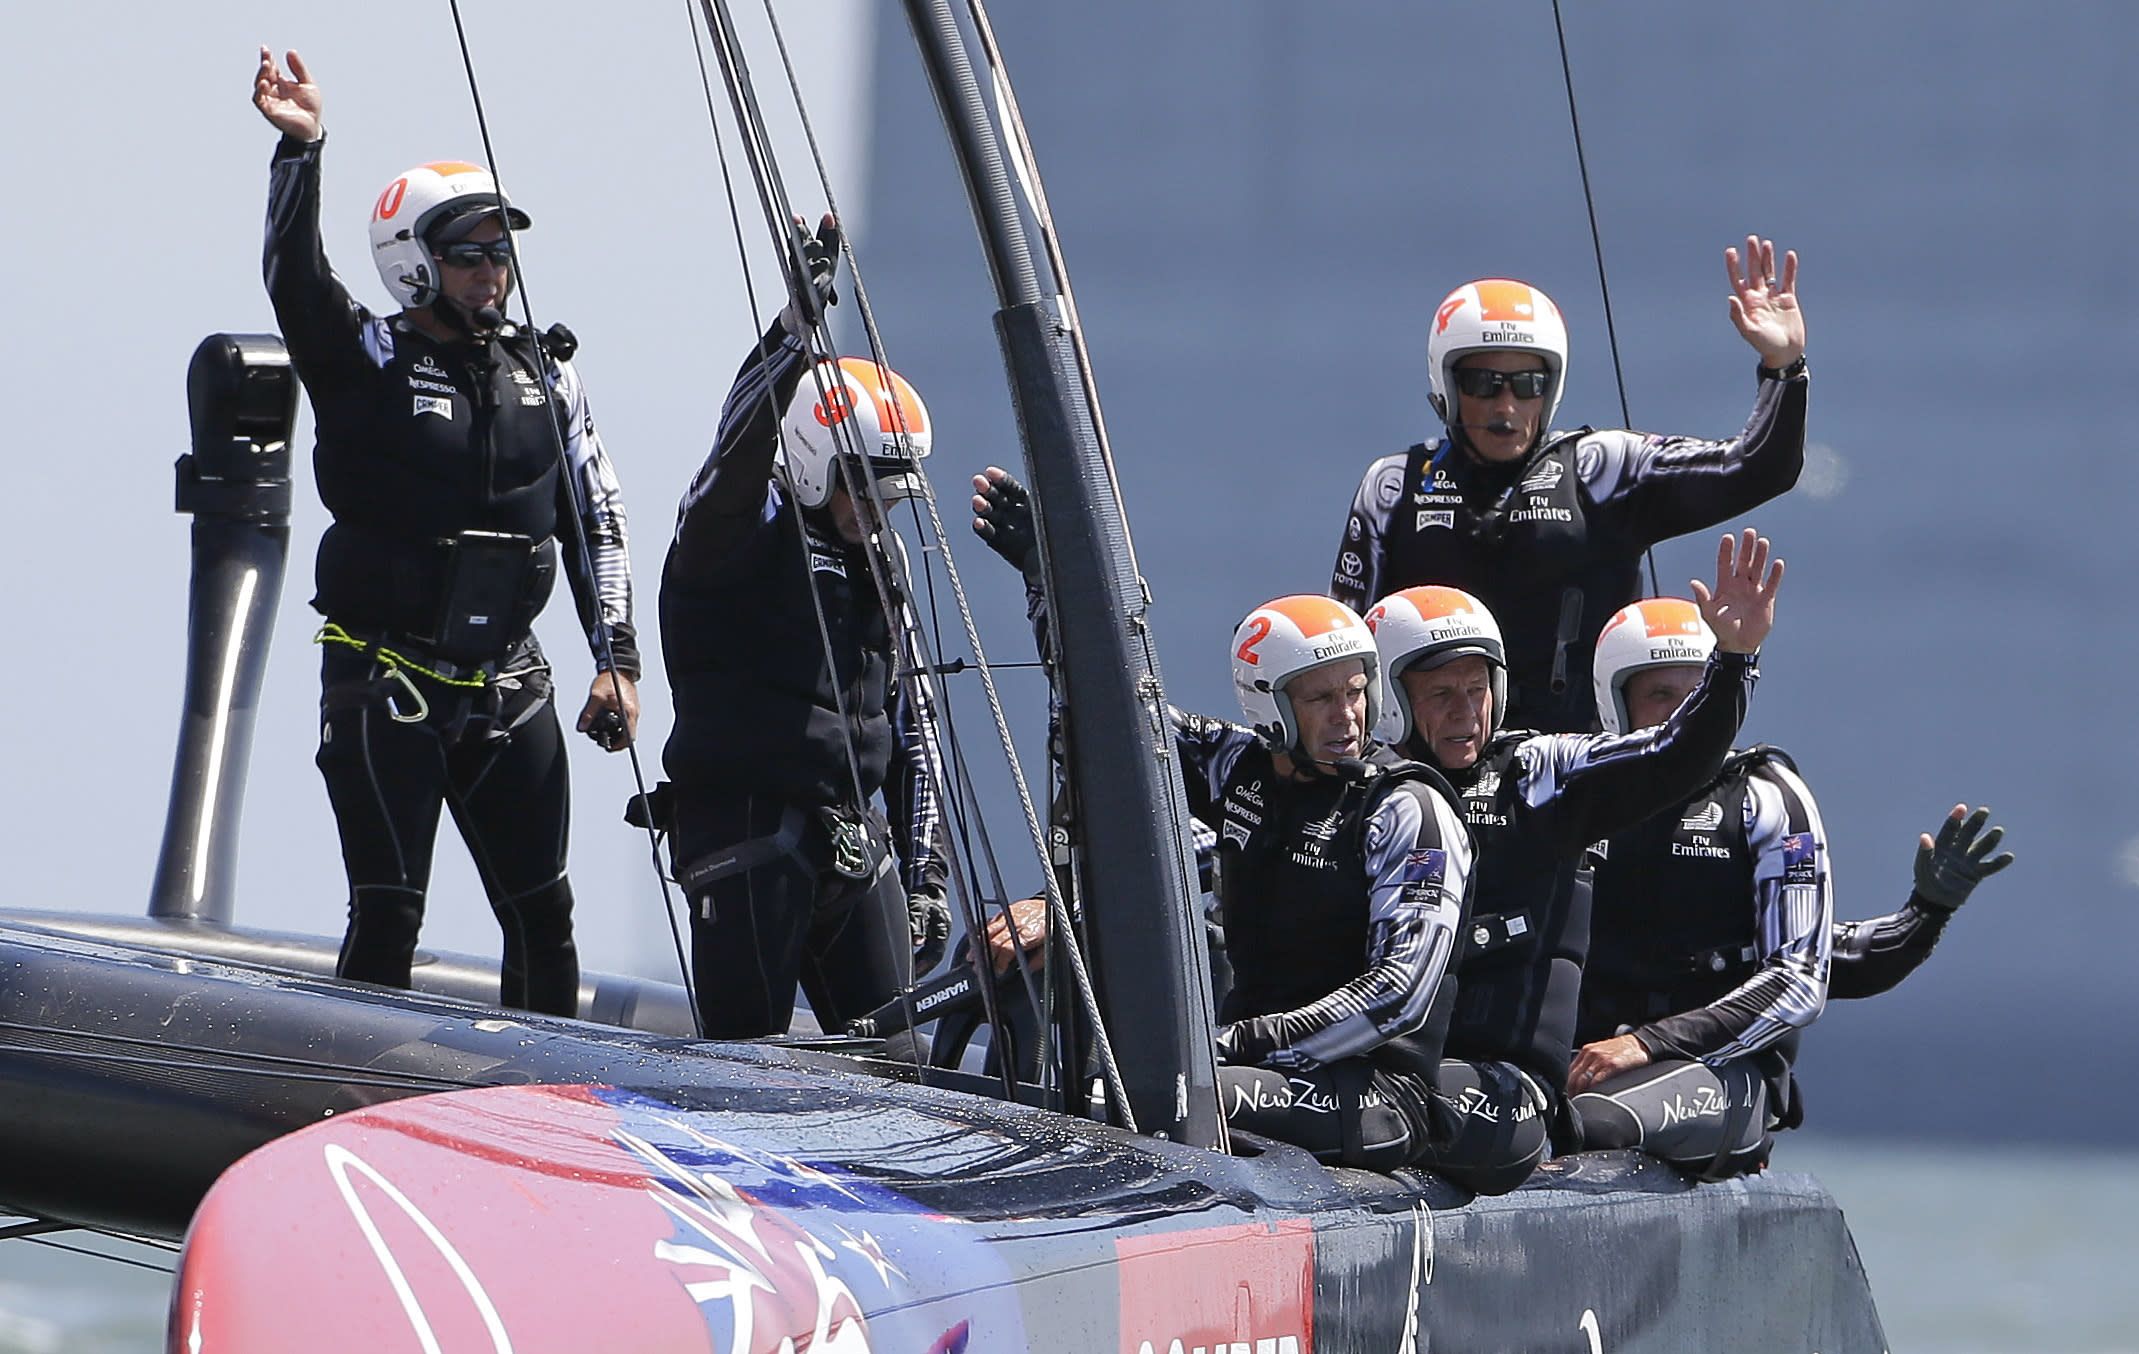 Kiwis take 4-1 lead in Louis Vuitton Cup finals